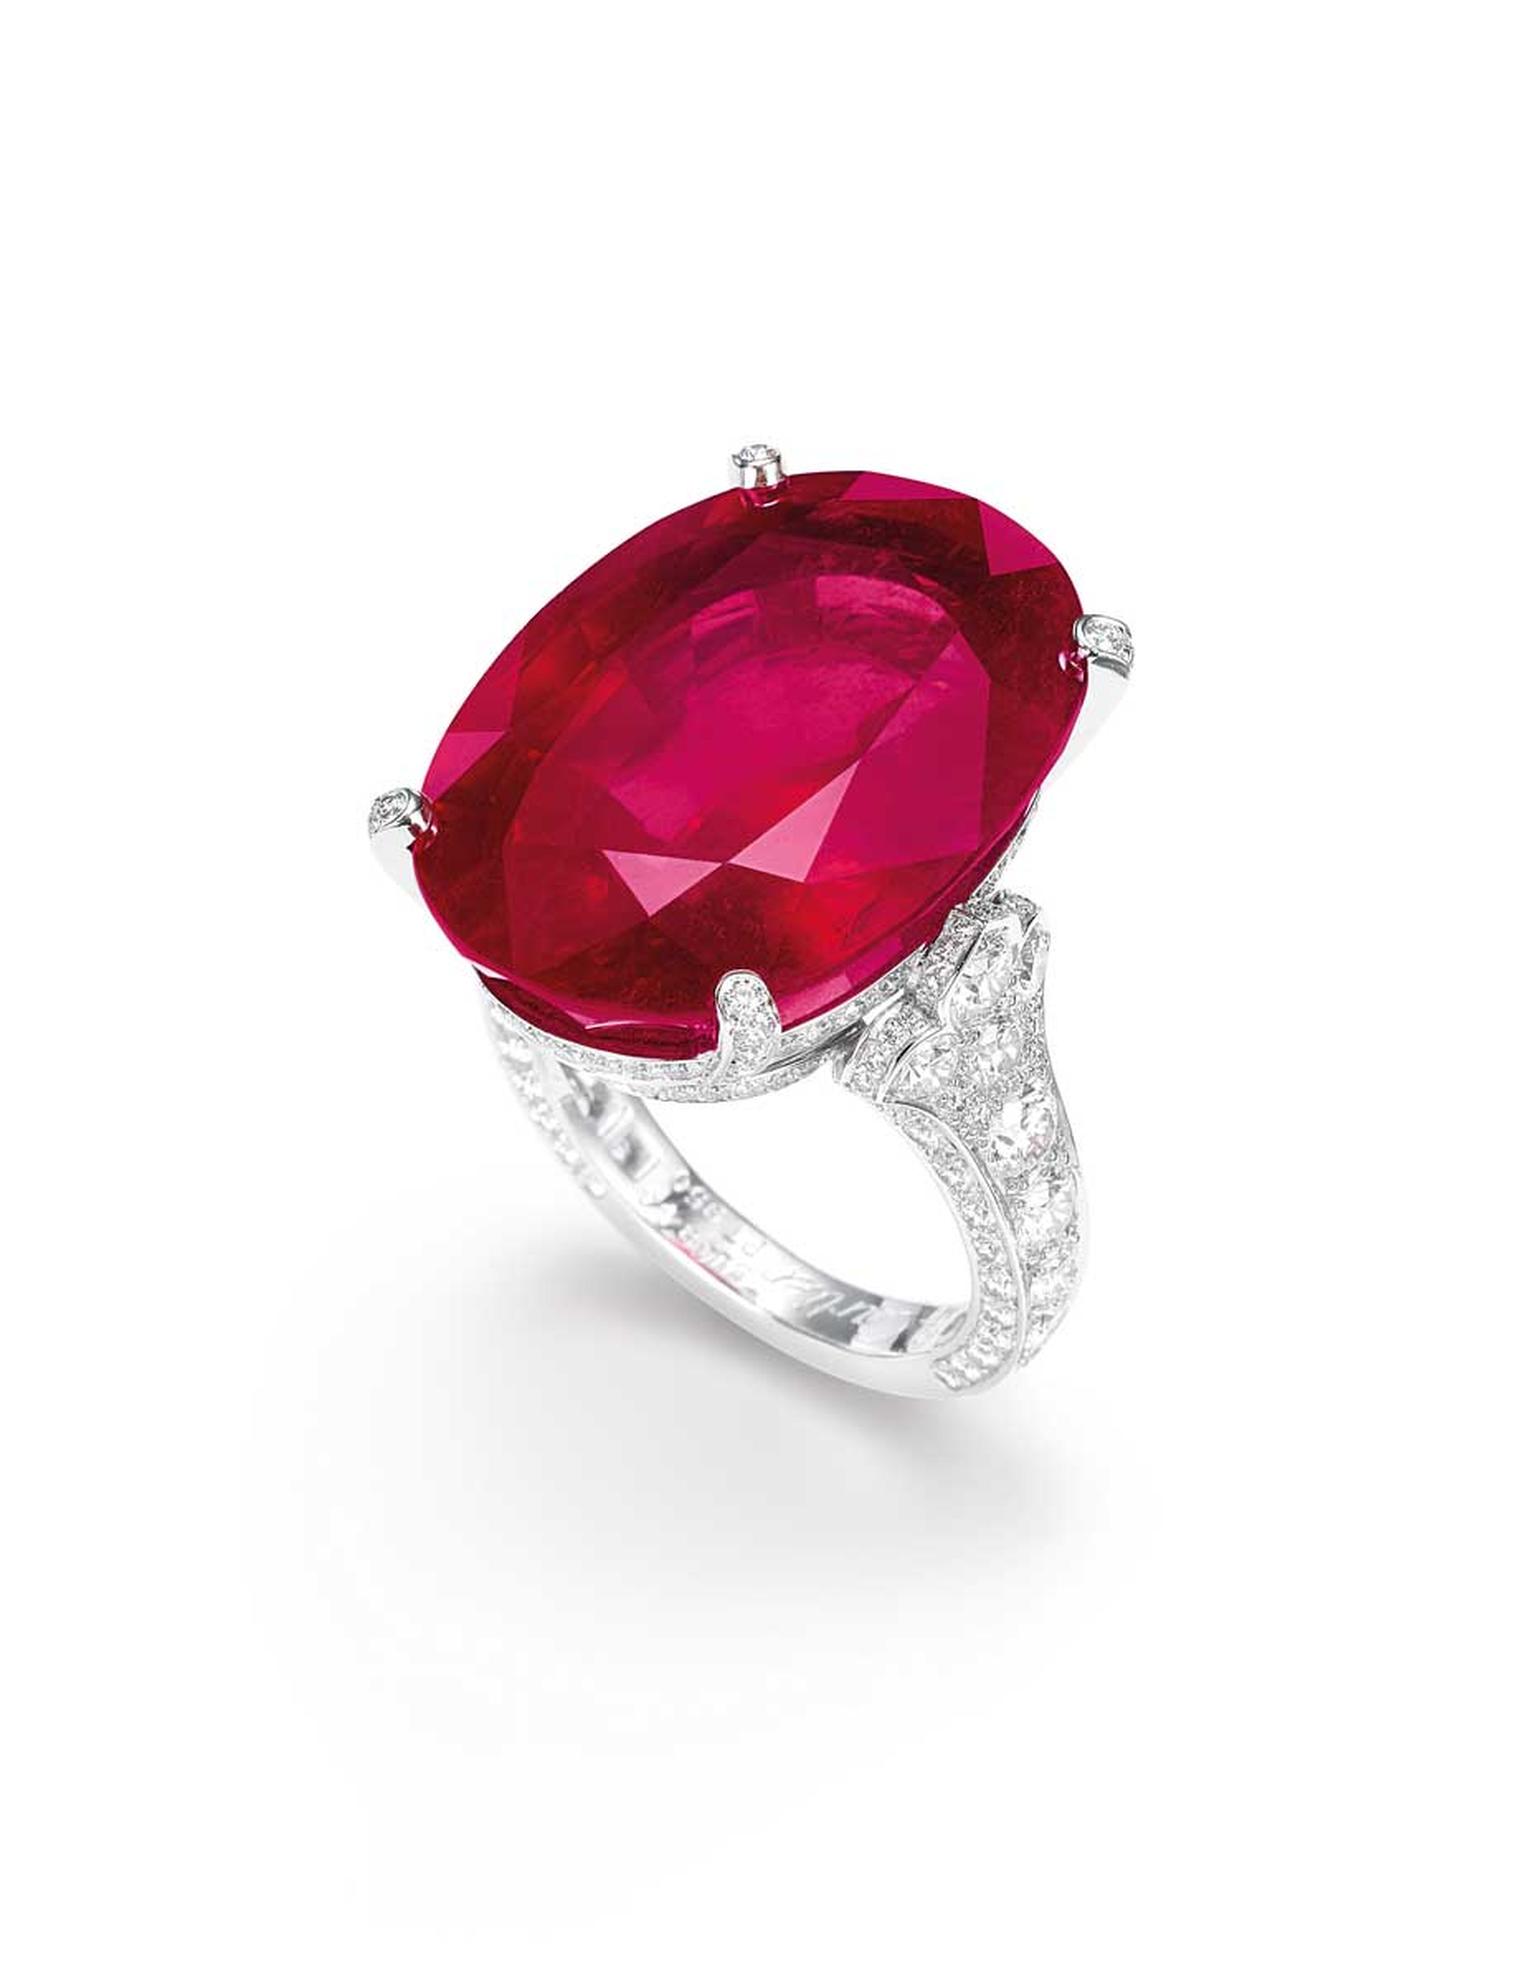 An oval Burmese ruby and diamond ring was sold for US$7,338,462 million, making it the most expensive ruby ever sold at auction.